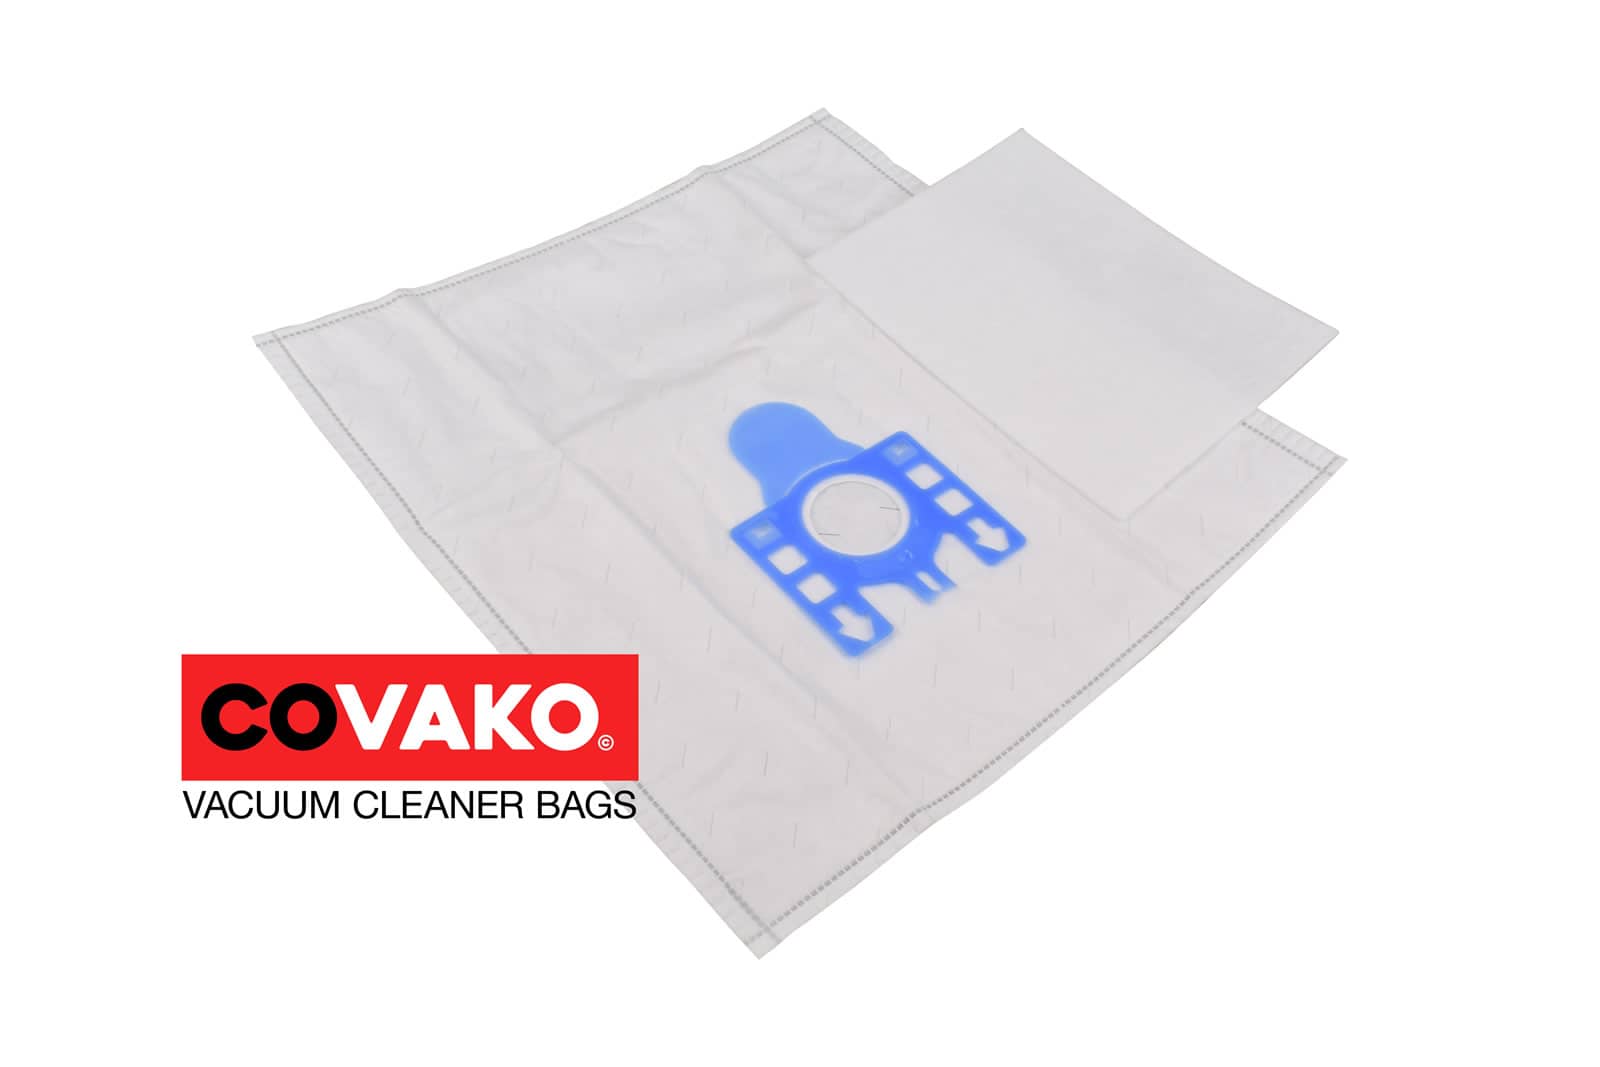 Miele S600-S699 Serie / Synthesis - Miele vacuum cleaner bags